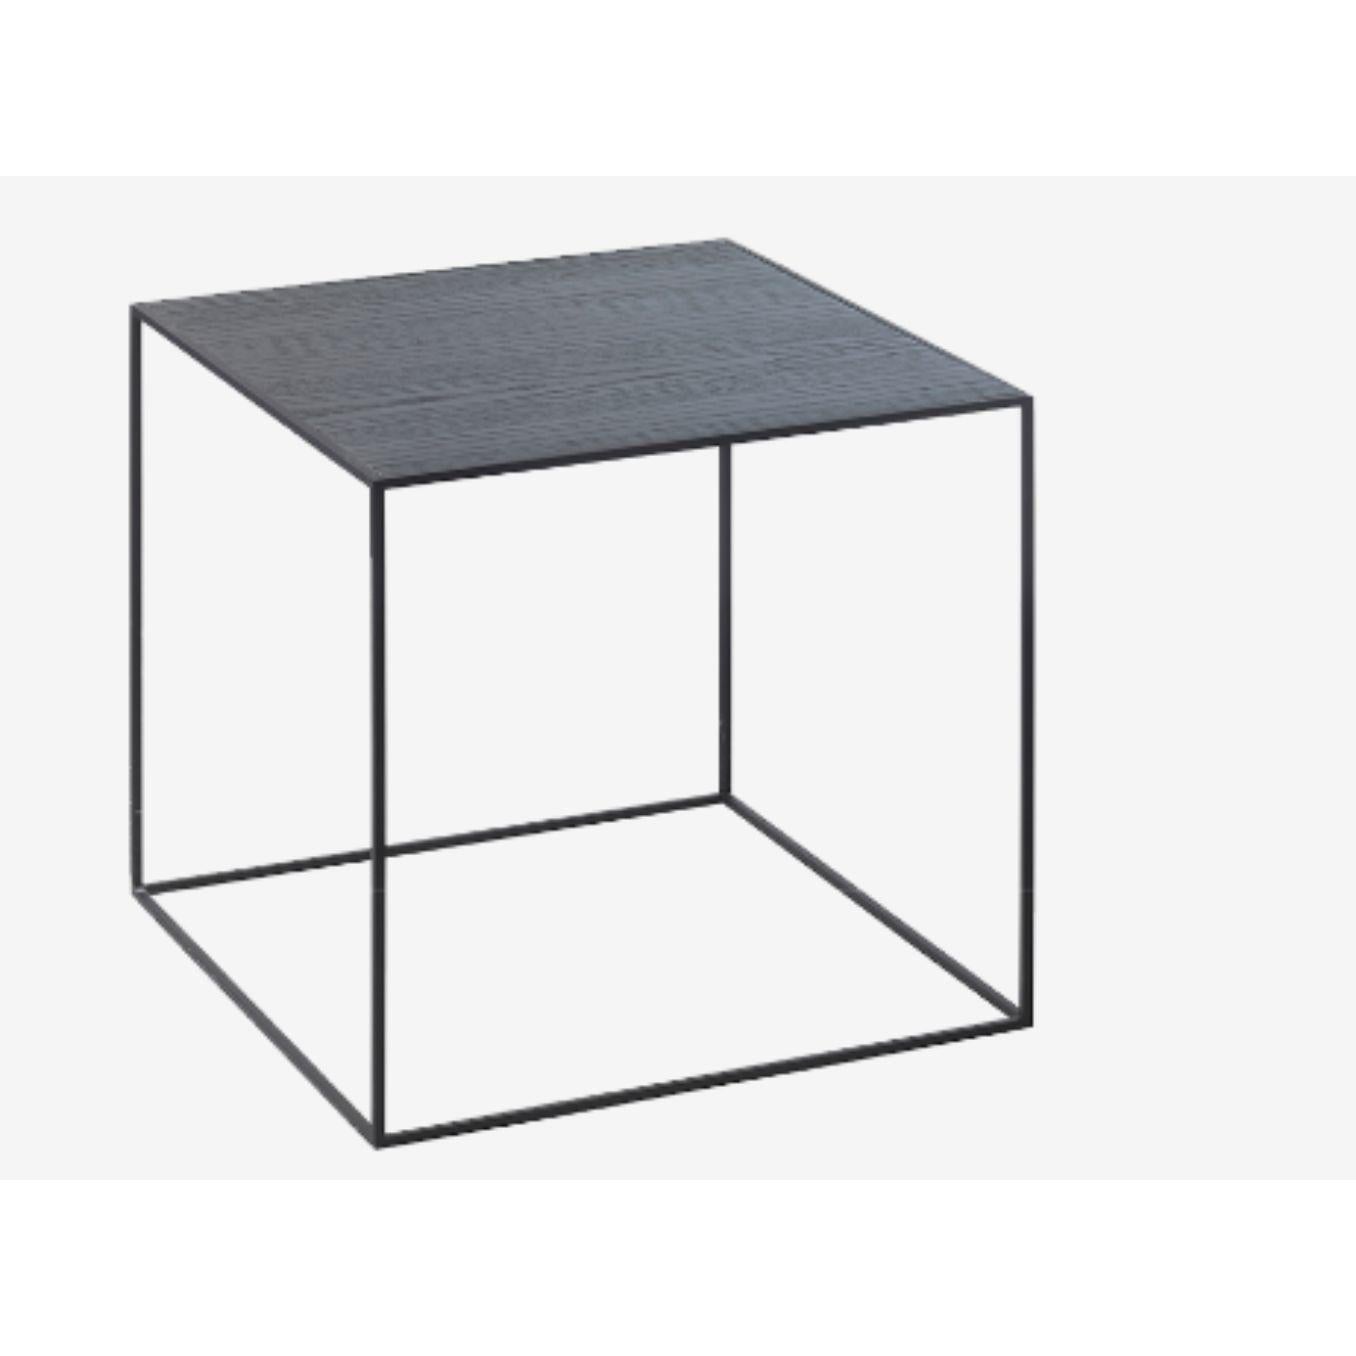 49 Black ash twin table by Lassen
Dimensions: W 49 x D 49 x H 0.5 cm 
Materials: finér, melamin, melamin, melamine, metal, veneer
Also available in different colours and dimensions.

By Lassen is a Danish design brand focused on iconic designs